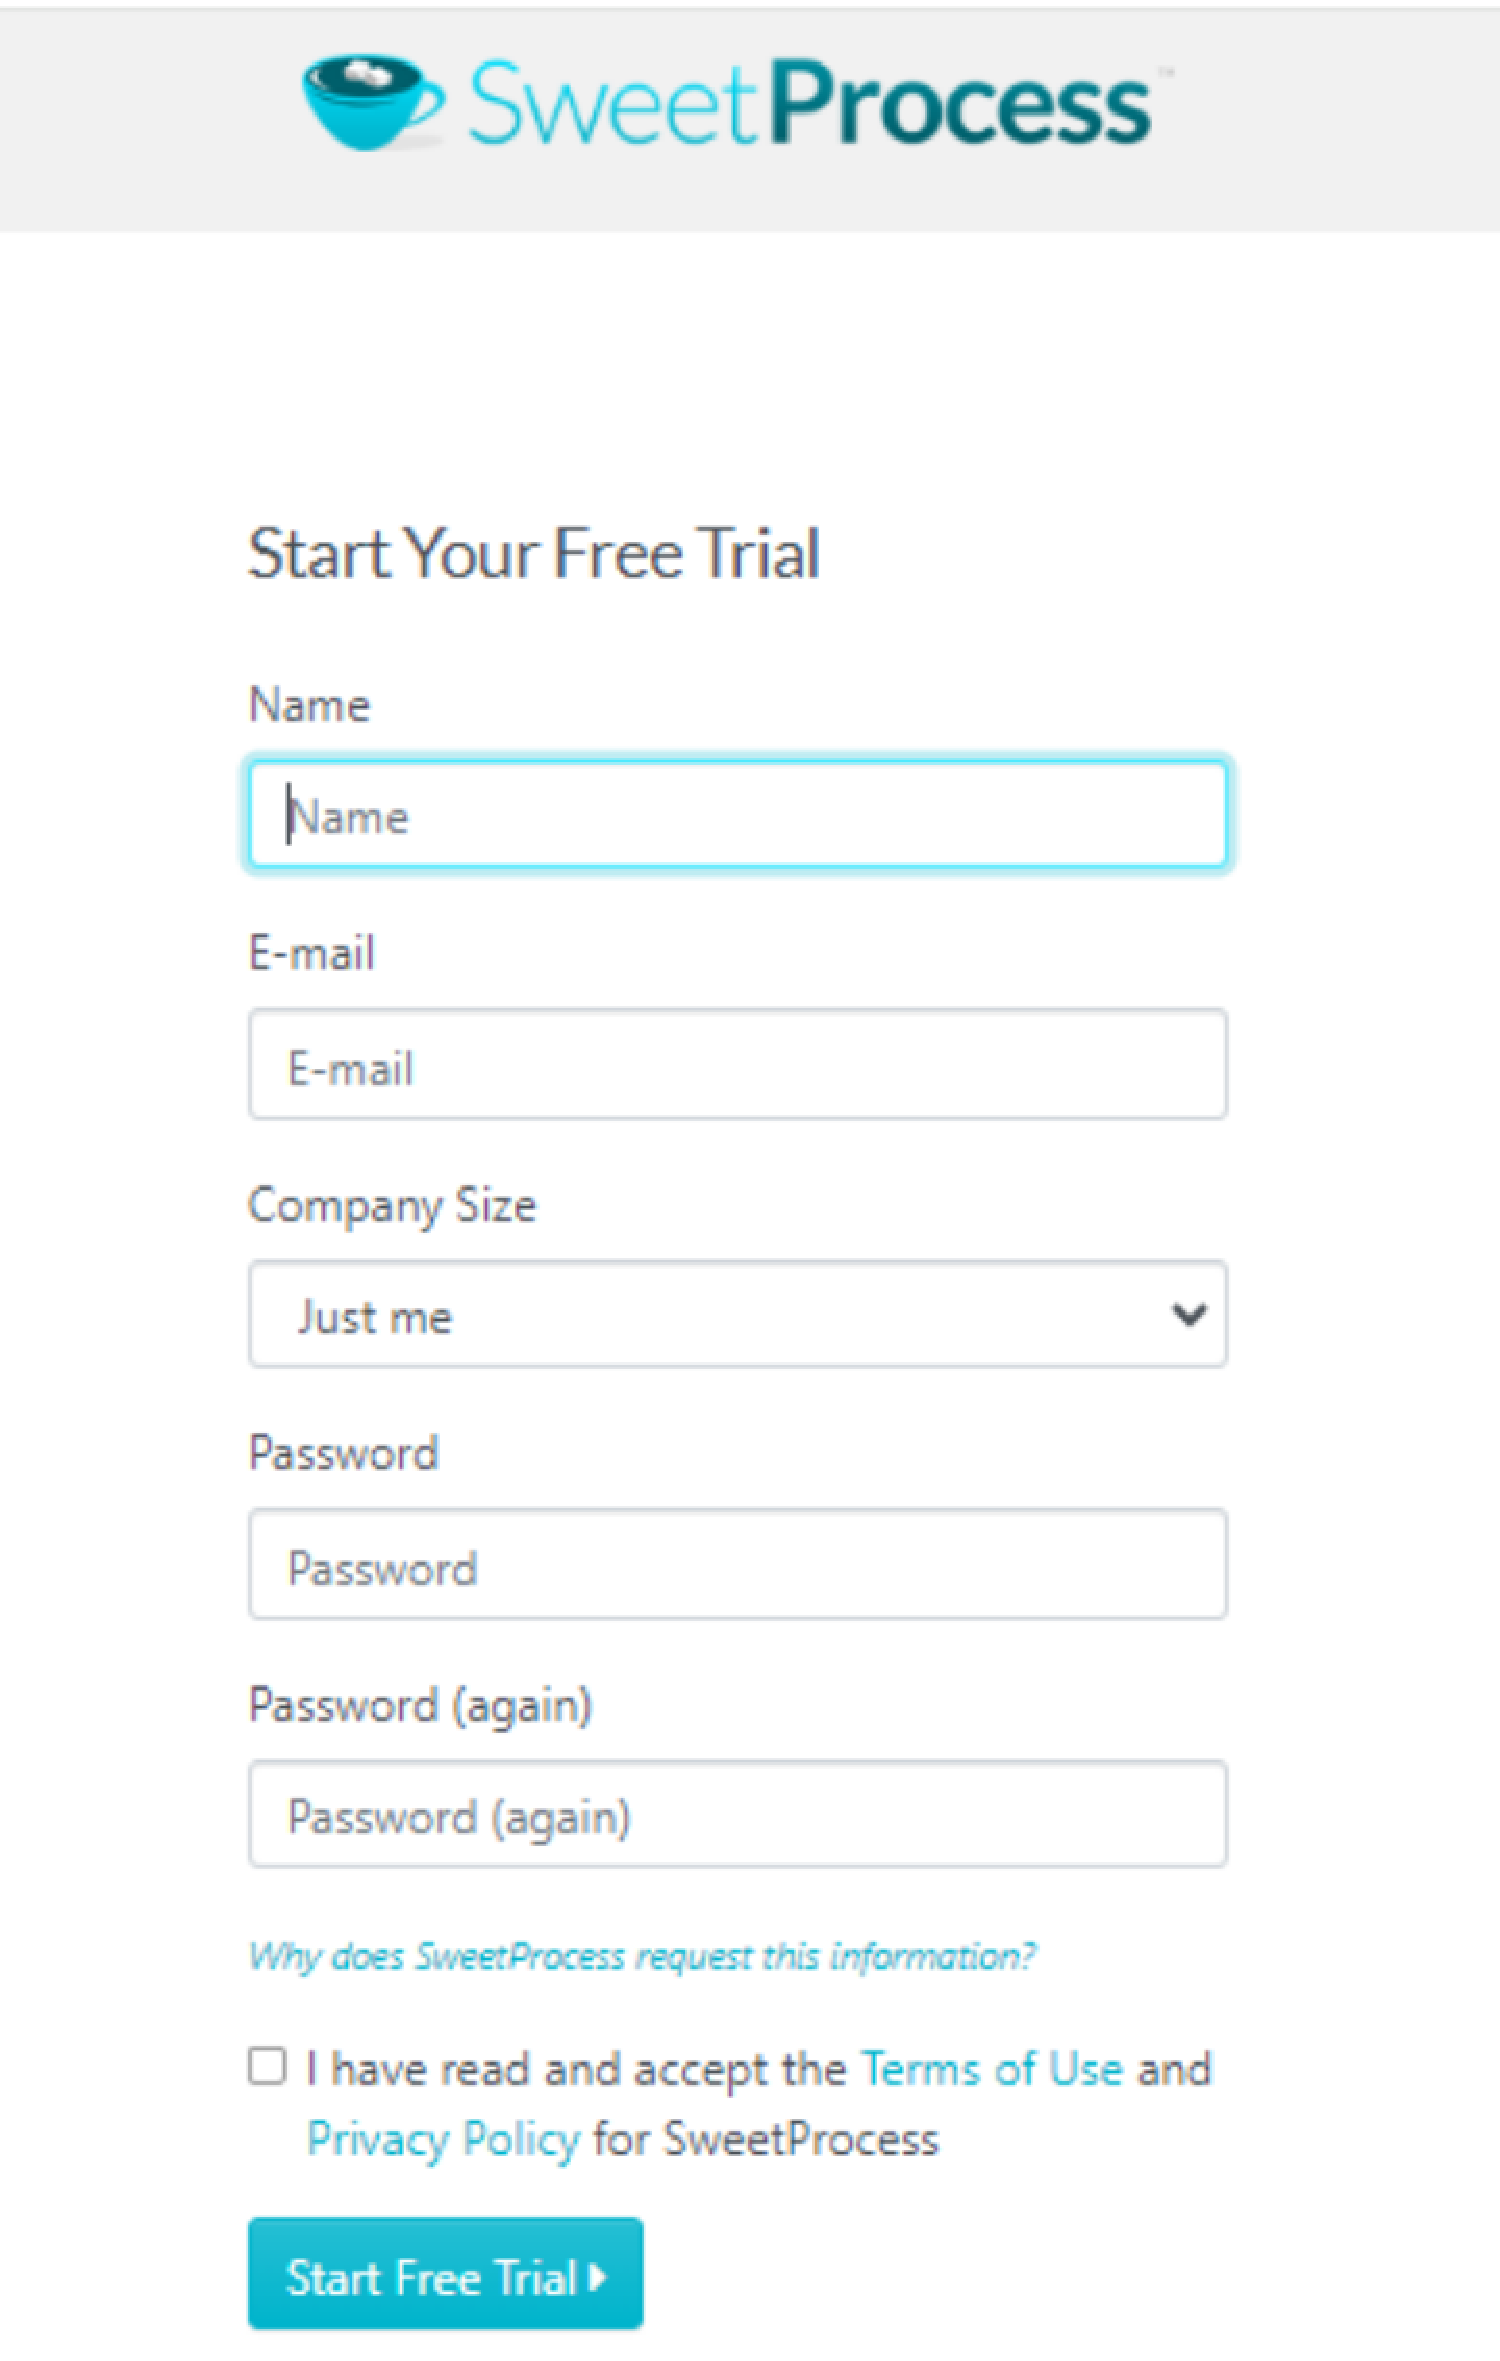 Start Your Free Trial